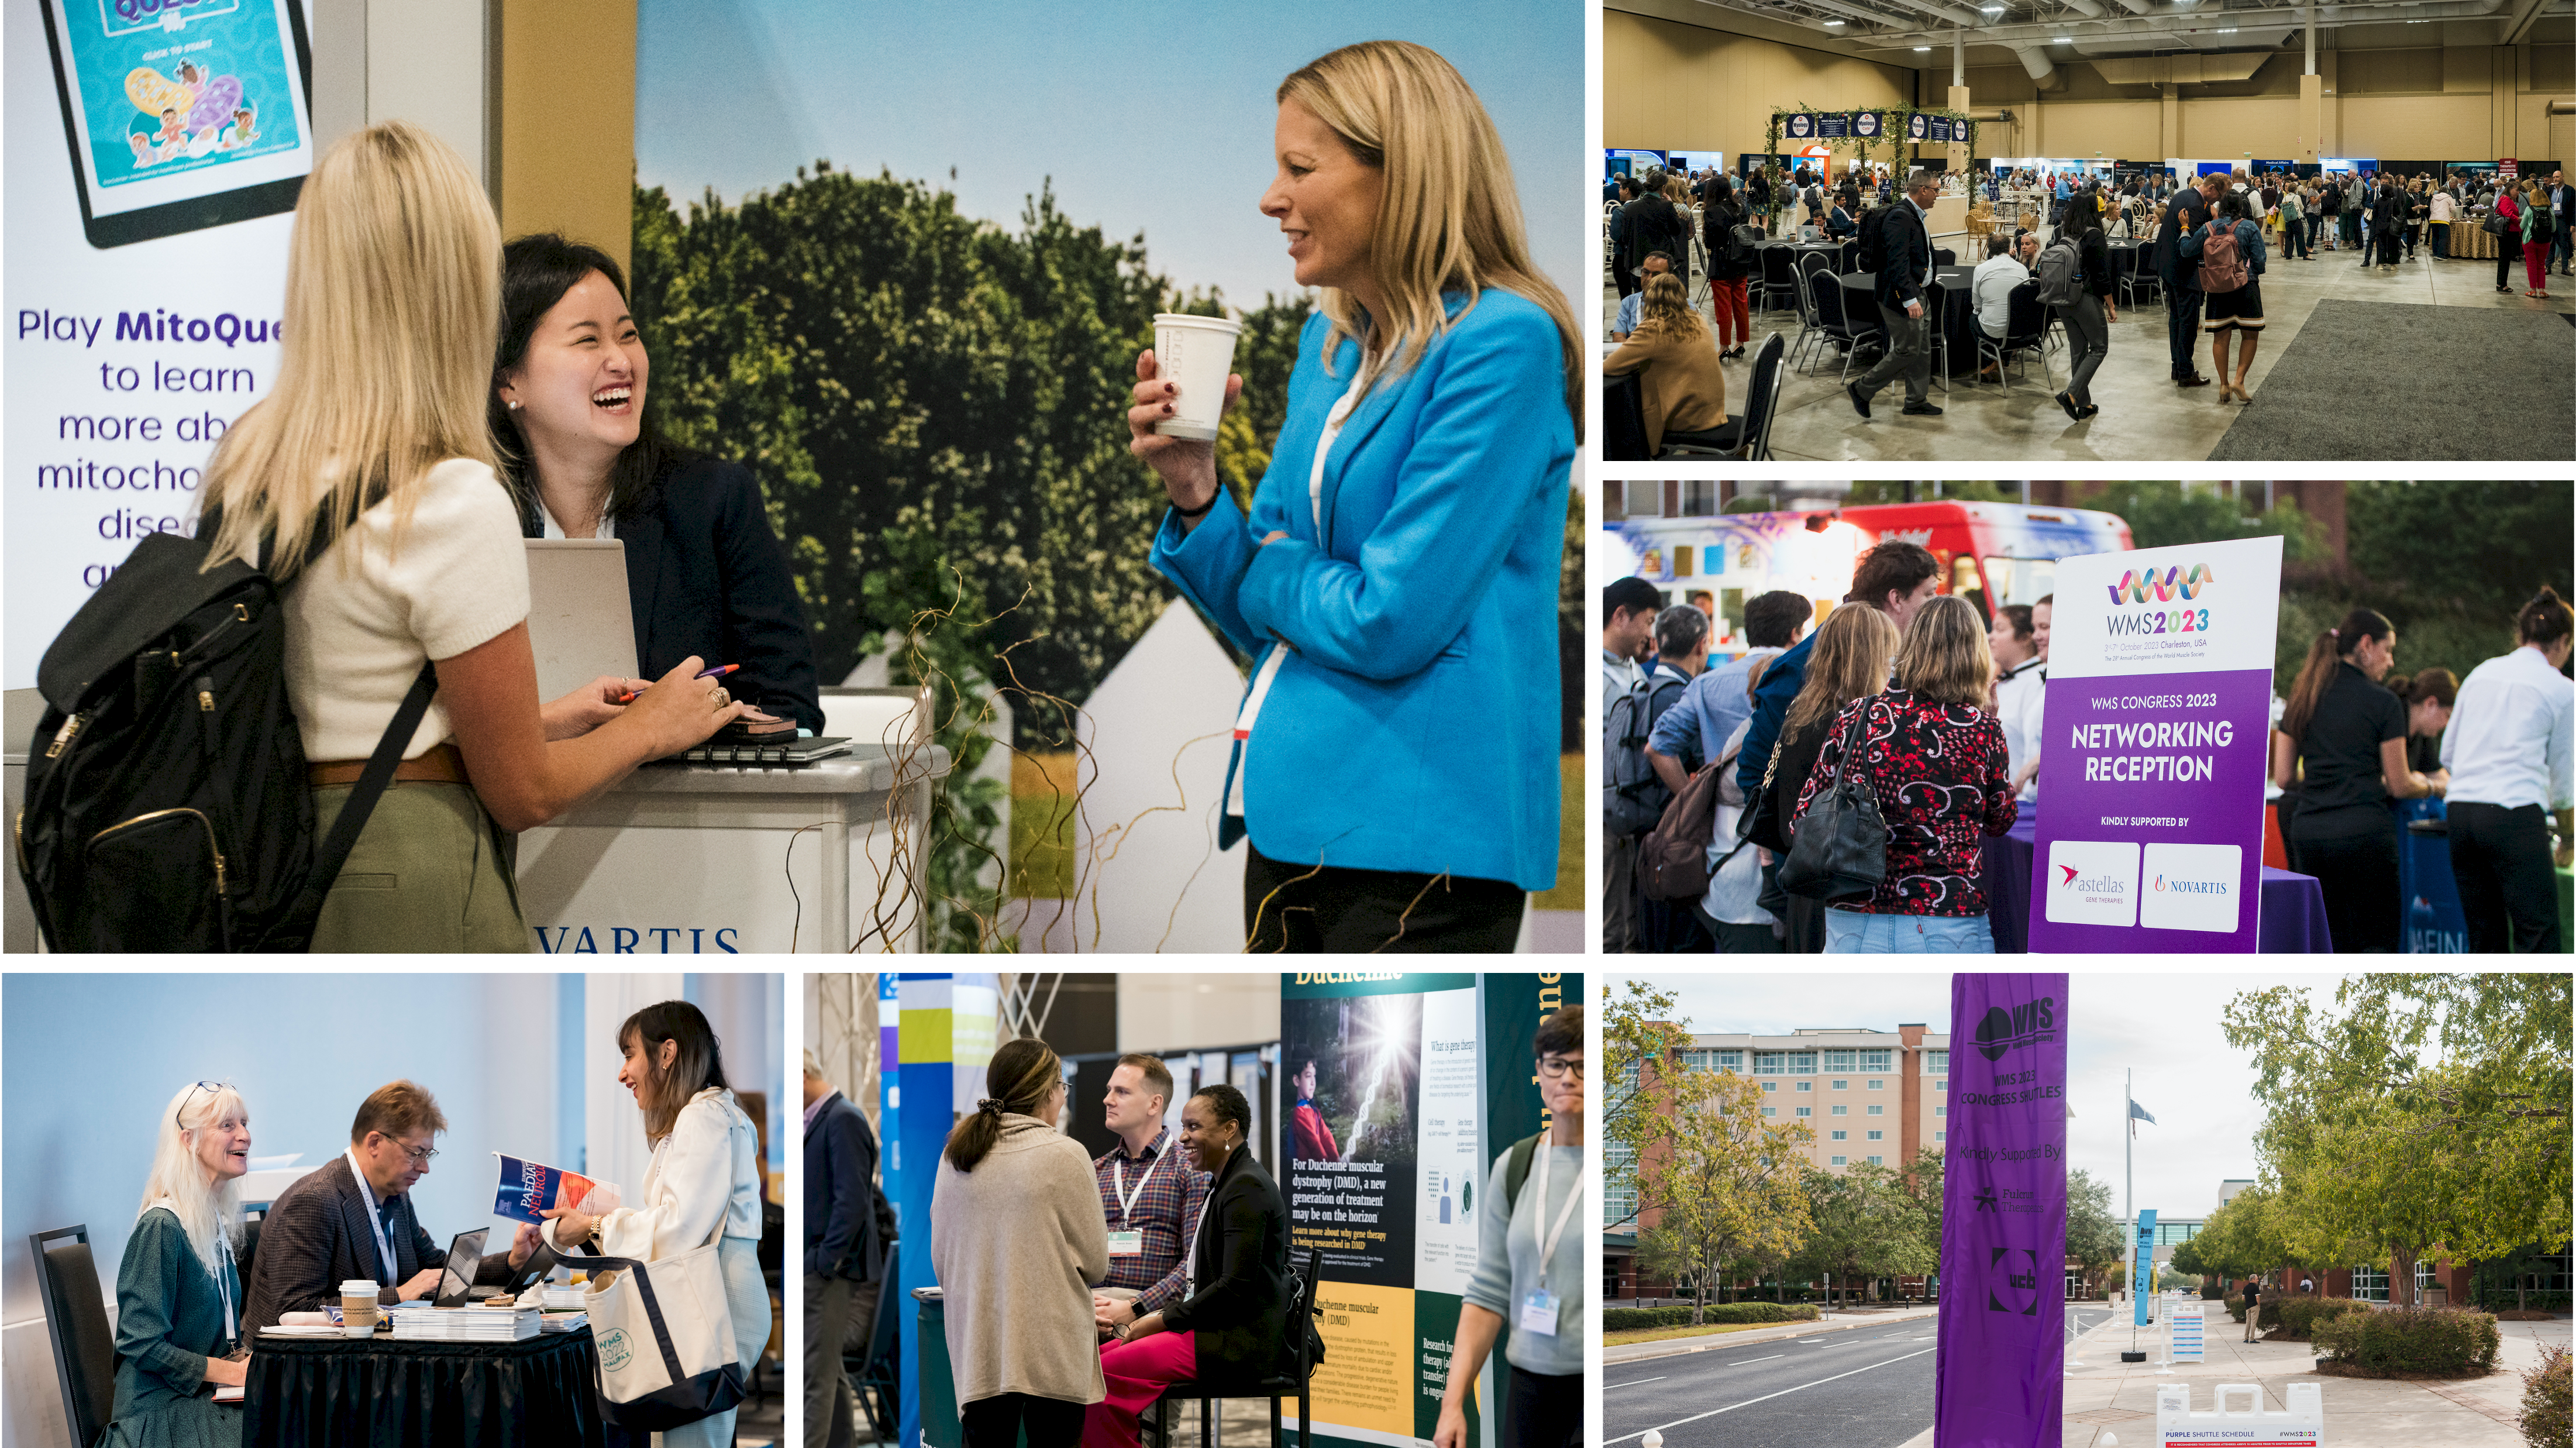 Image is a picture collage. On the far left is a picture of the symposia stage set up for a Sarepta presentation. Two women are walking across the stage from left to right. The middle image is of three women talking at a conference exhibition stand. The top image on the right shows the bus flags from WMS 2023 and the image below it shows a poster board with sponsor logos on for the networking reception at WMS 2023.